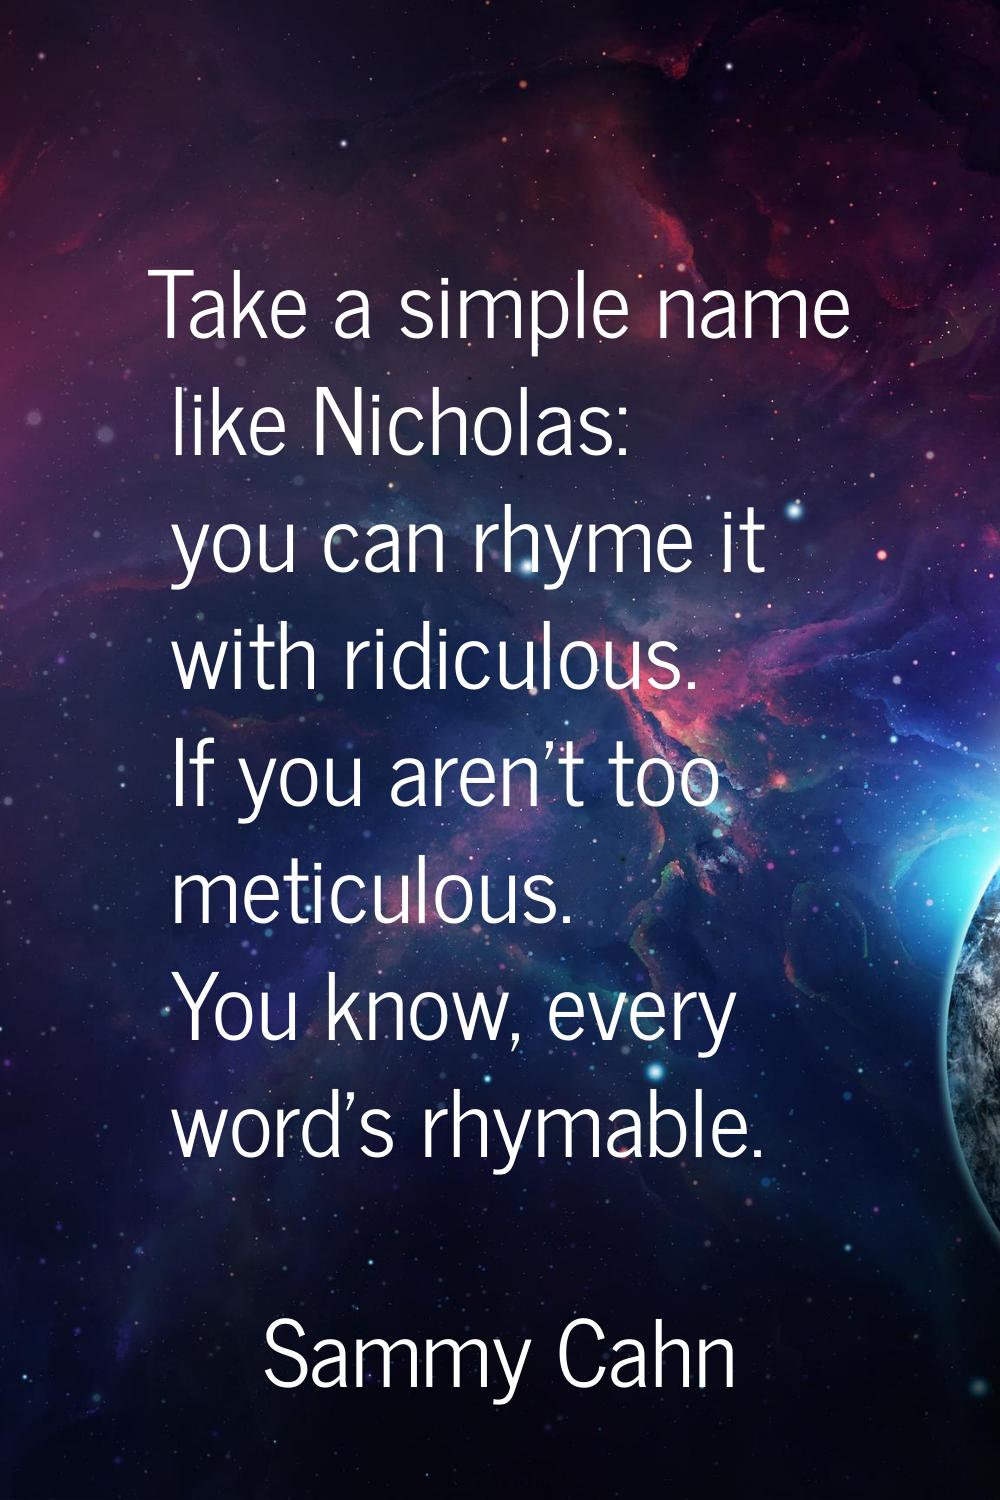 Take a simple name like Nicholas: you can rhyme it with ridiculous. If you aren't too meticulous. Y